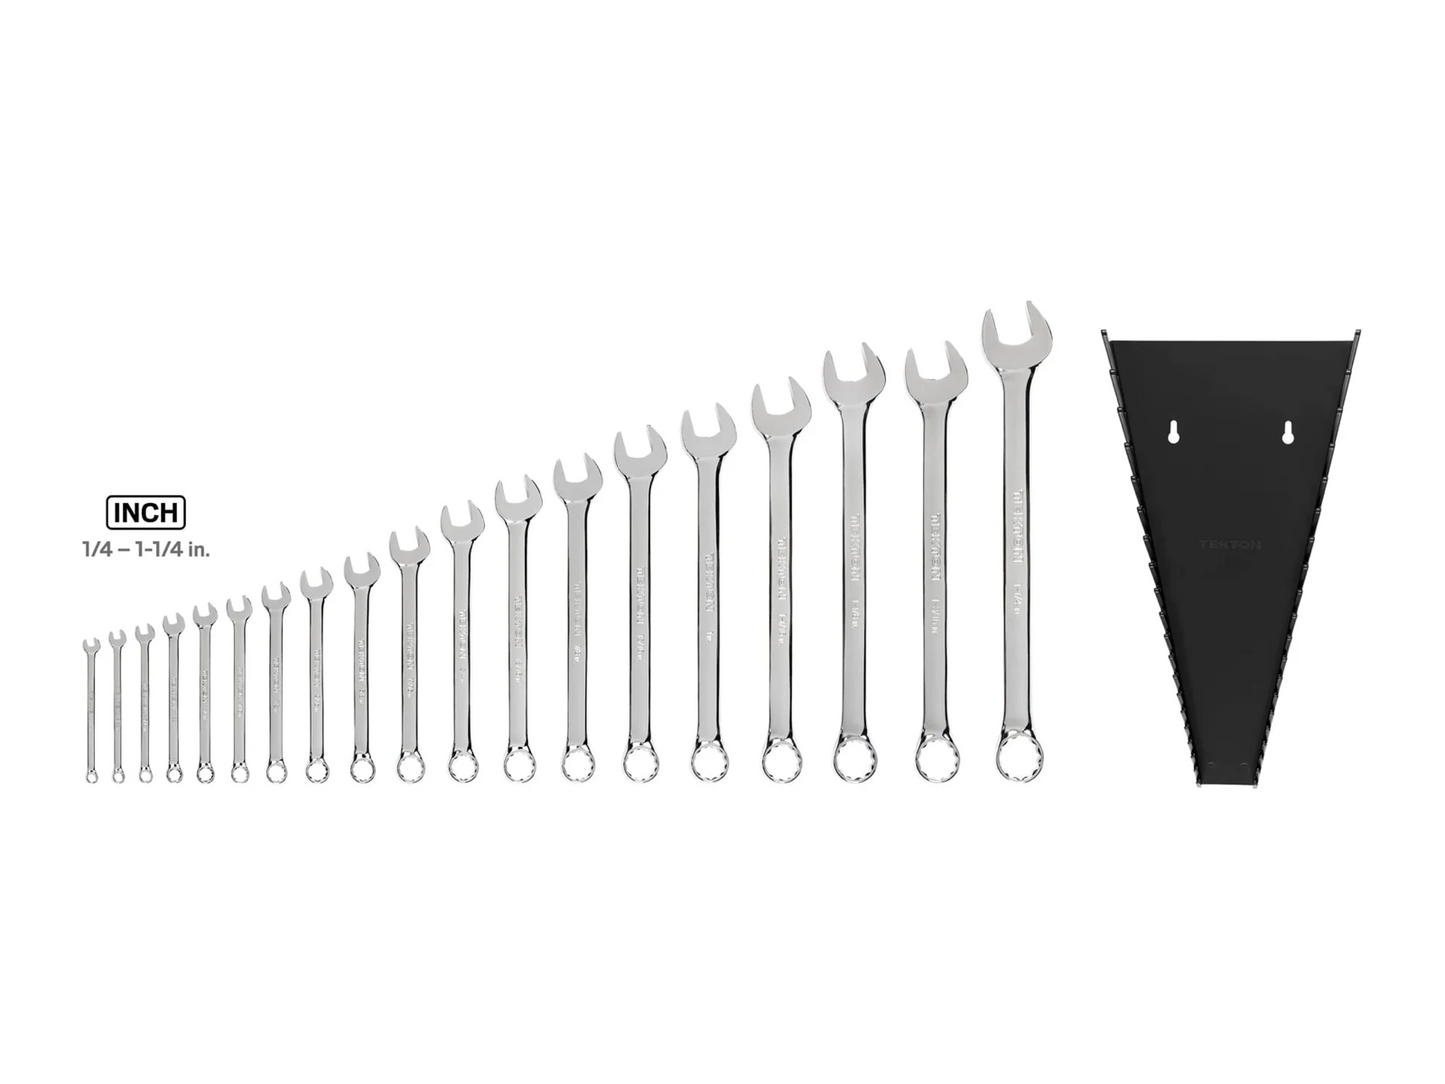 Tekton Combination Wrench Set, 19-Piece (1/4 - 1-1/4 in.) - Rack (WCB91102)